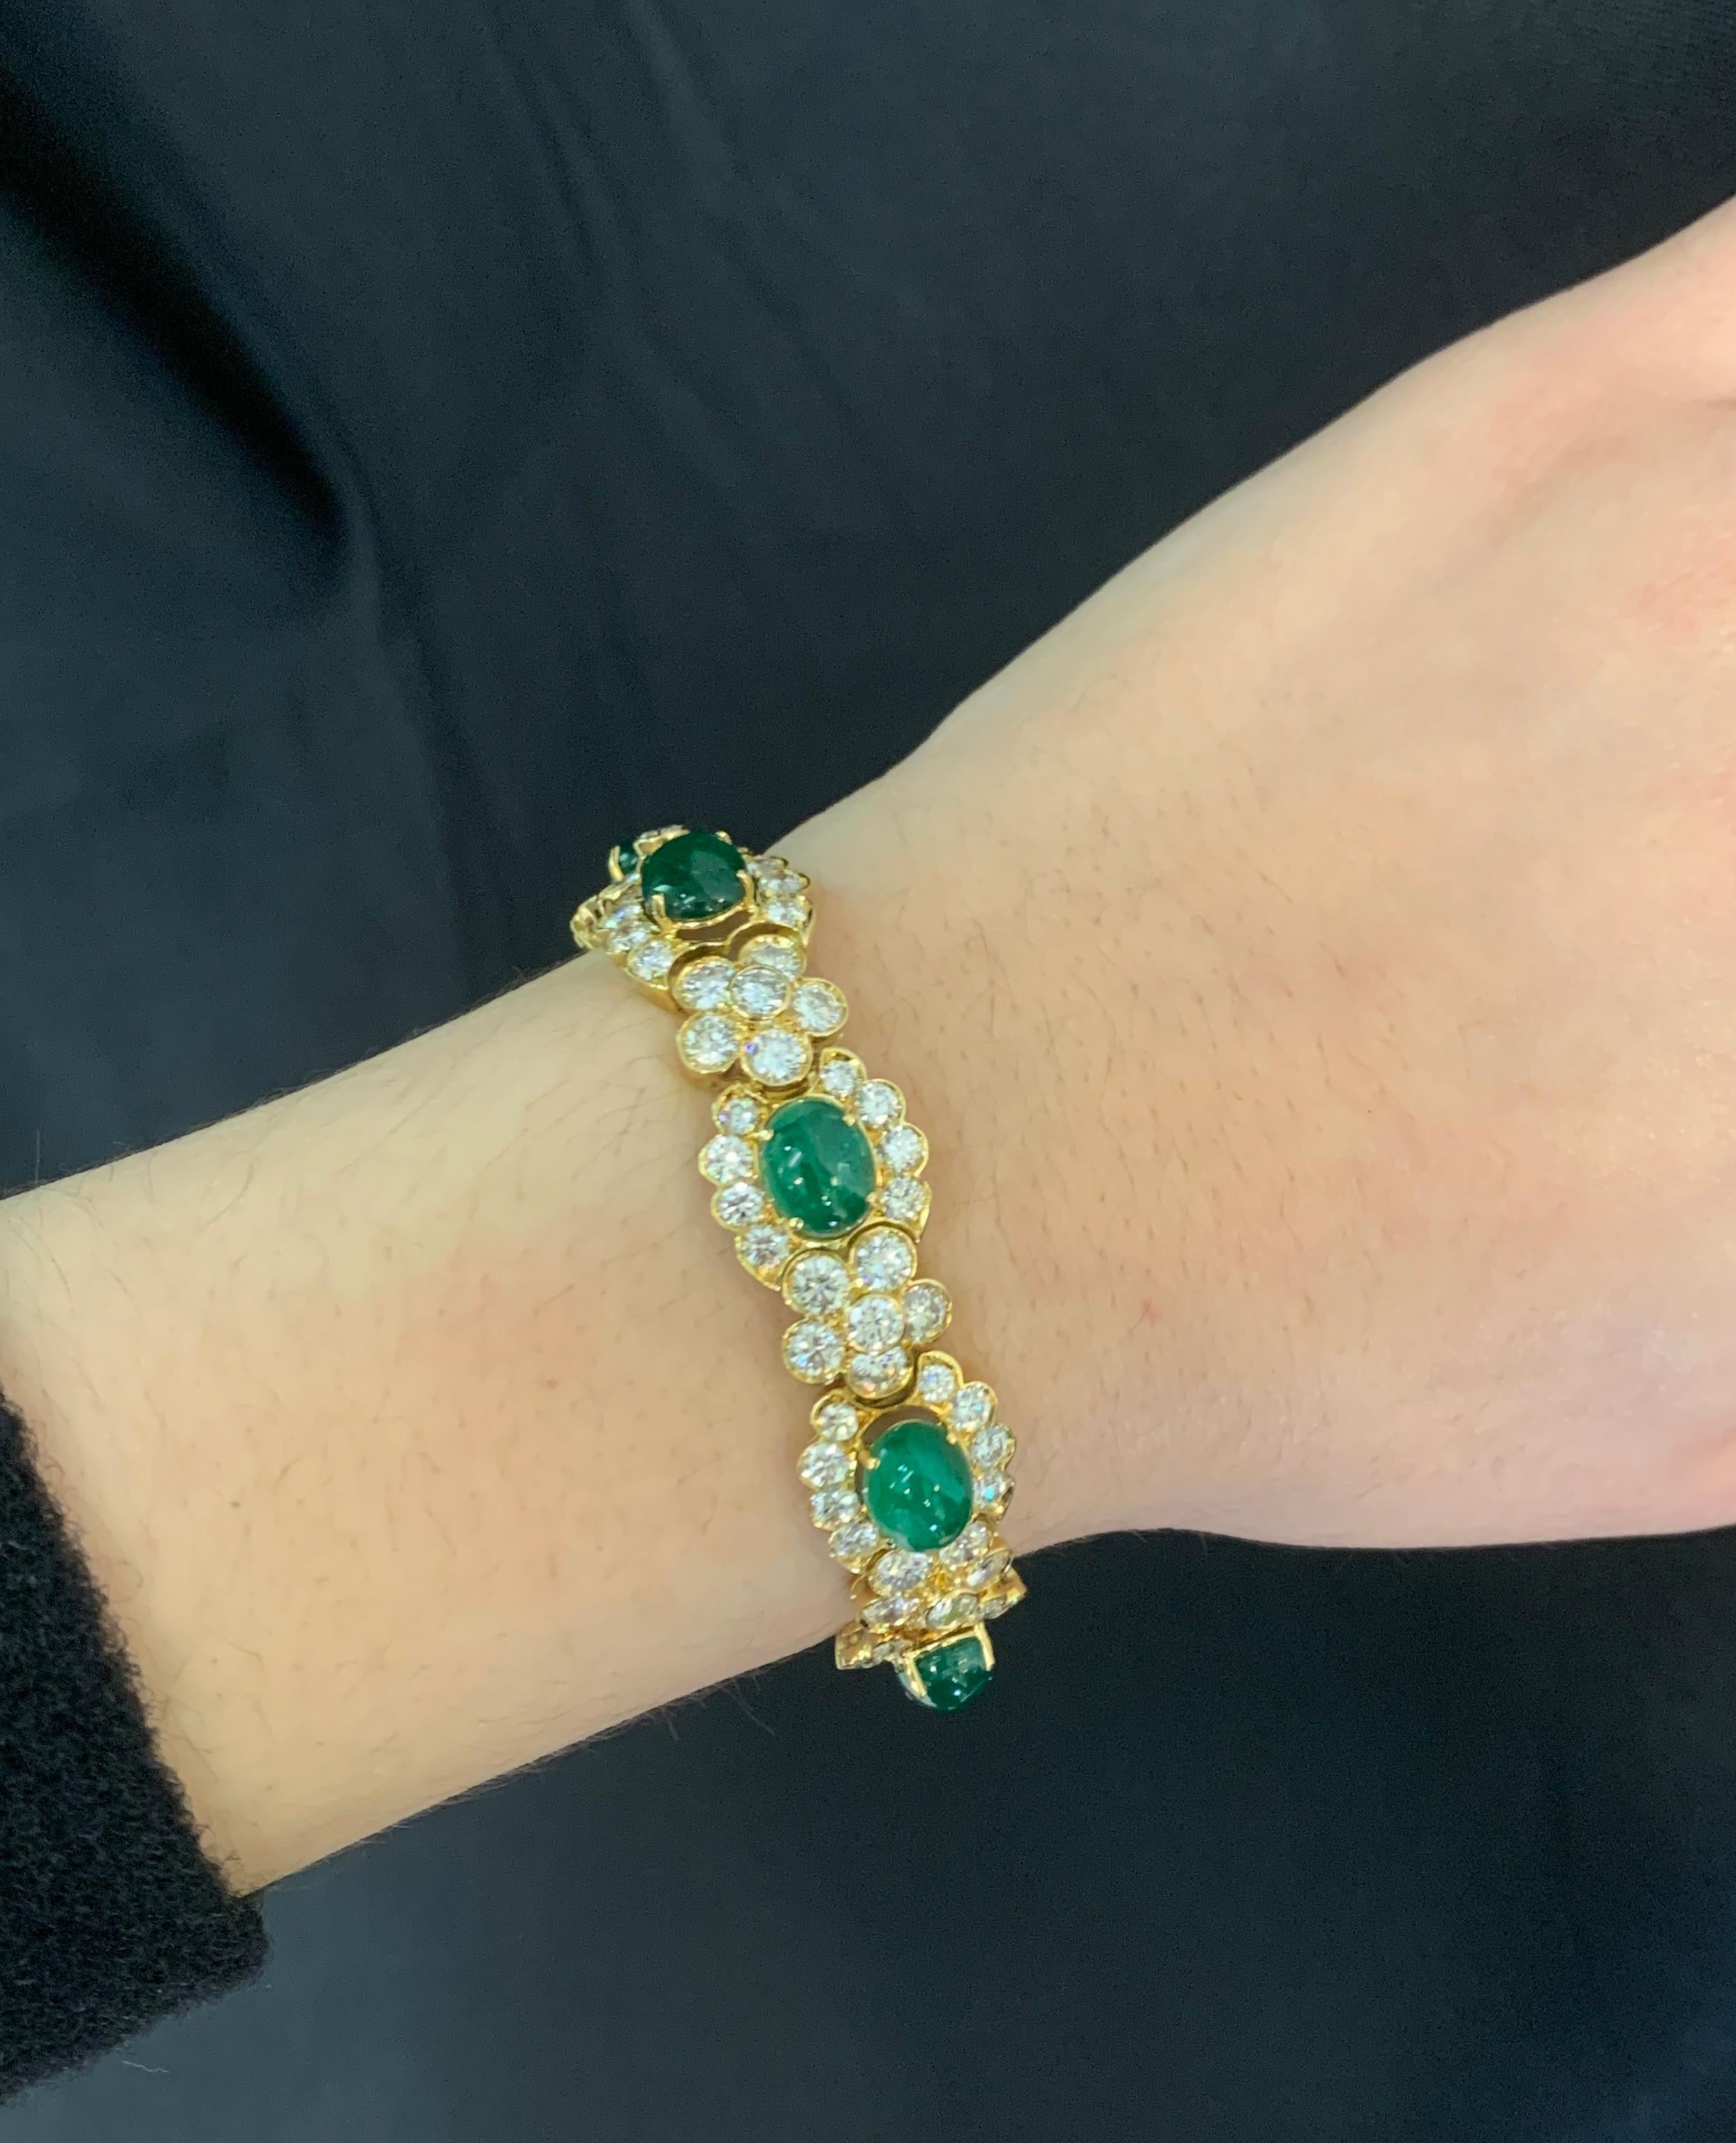 Cabochon Emerald and Diamond Bracelet 
 
Beautiful yellow gold bracelet with floral motif. It features 6 cabochon emeralds and 126 round-cut diamonds. 

Approximate Emerald Weight: 13.60 Carats 
Approximate Diamond Weight: 16.92 Carats
Approximate